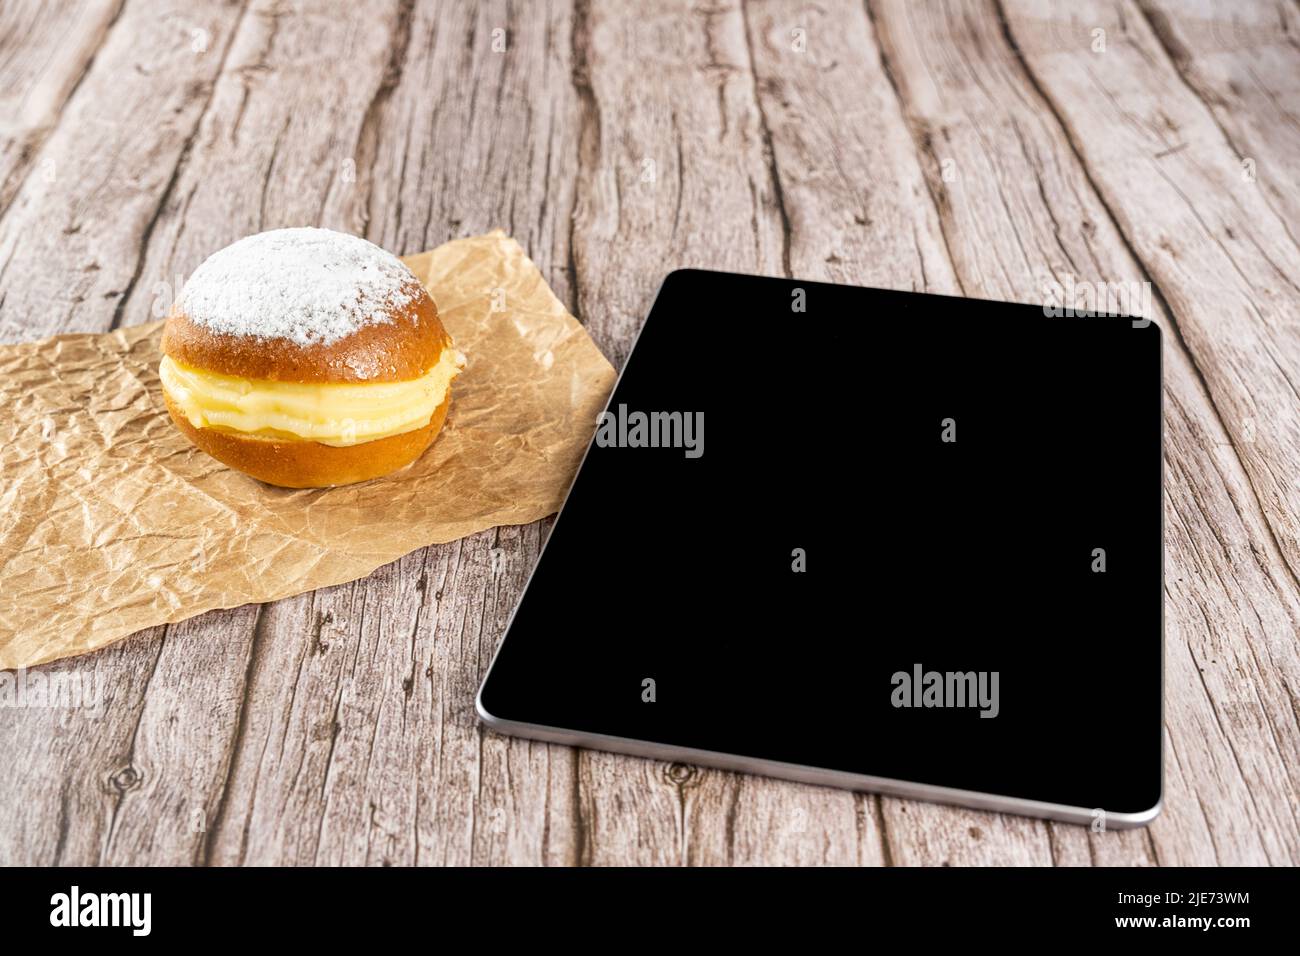 Brazilian cream doughnuts on a brown paper next to a tablet. Stock Photo